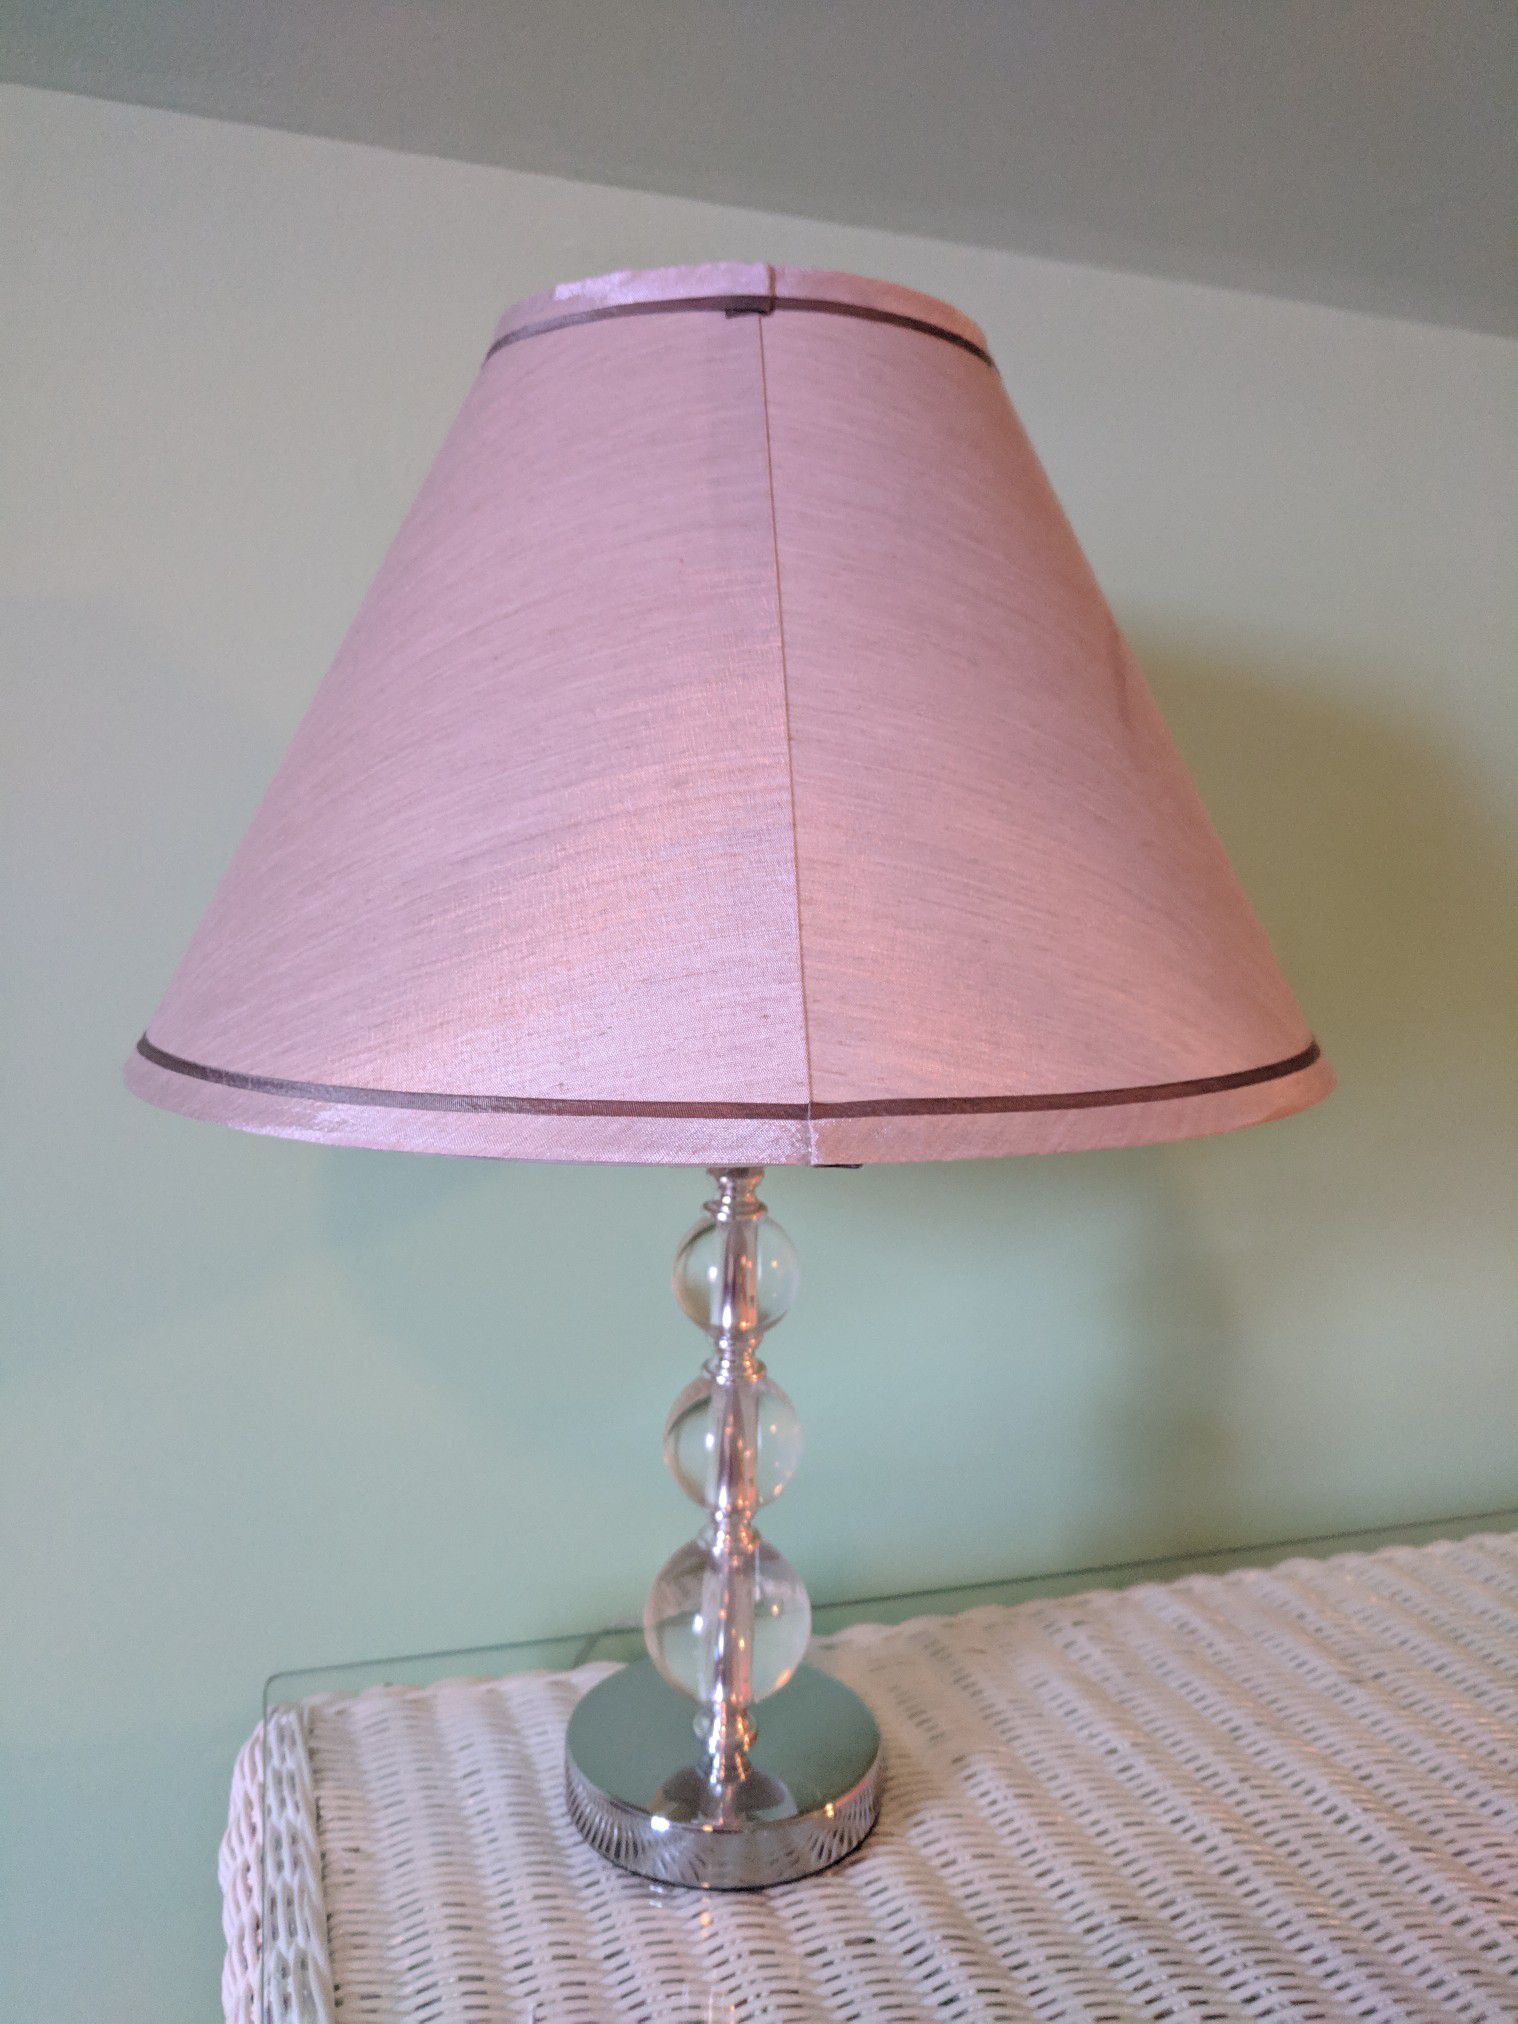 Desk or End Table Lamp - 19.5" Tall